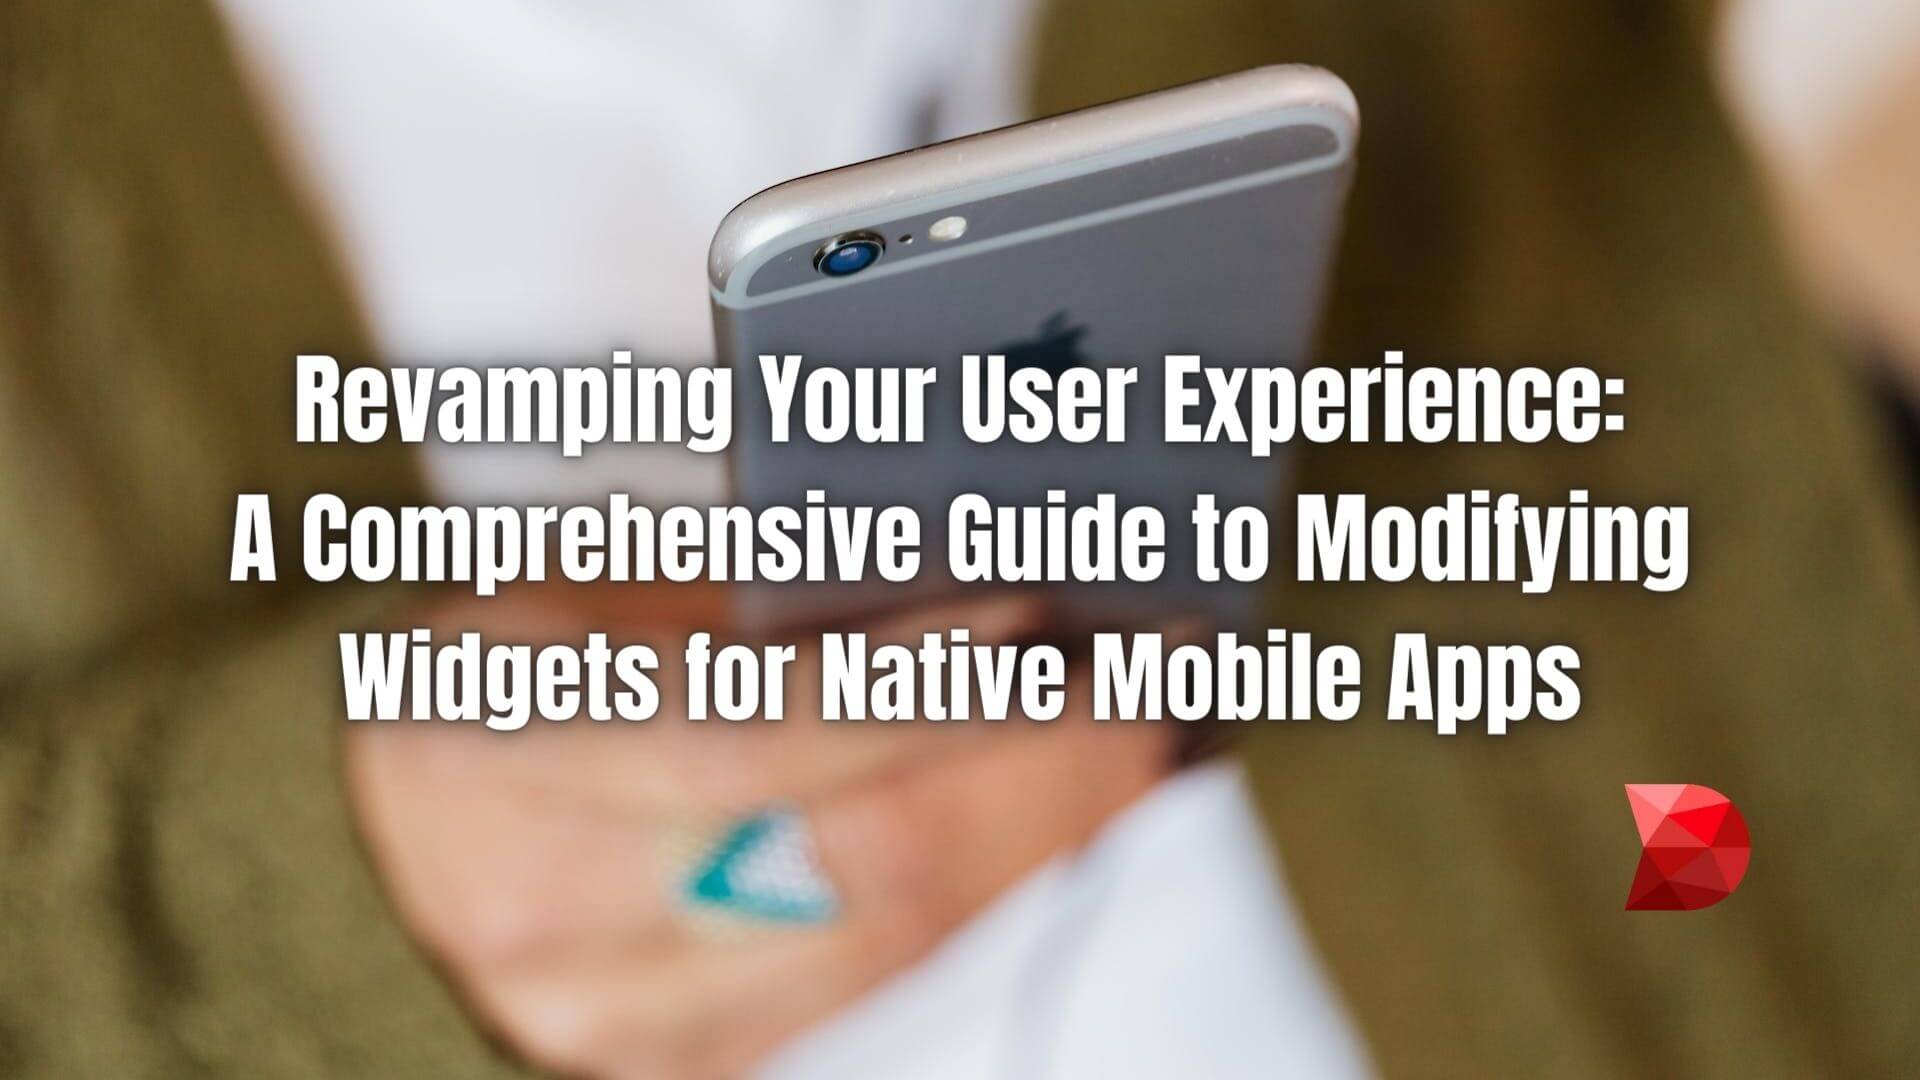 Discover the art of enhancing native mobile app widgets! Click here to learn insights and techniques for efficient customization.